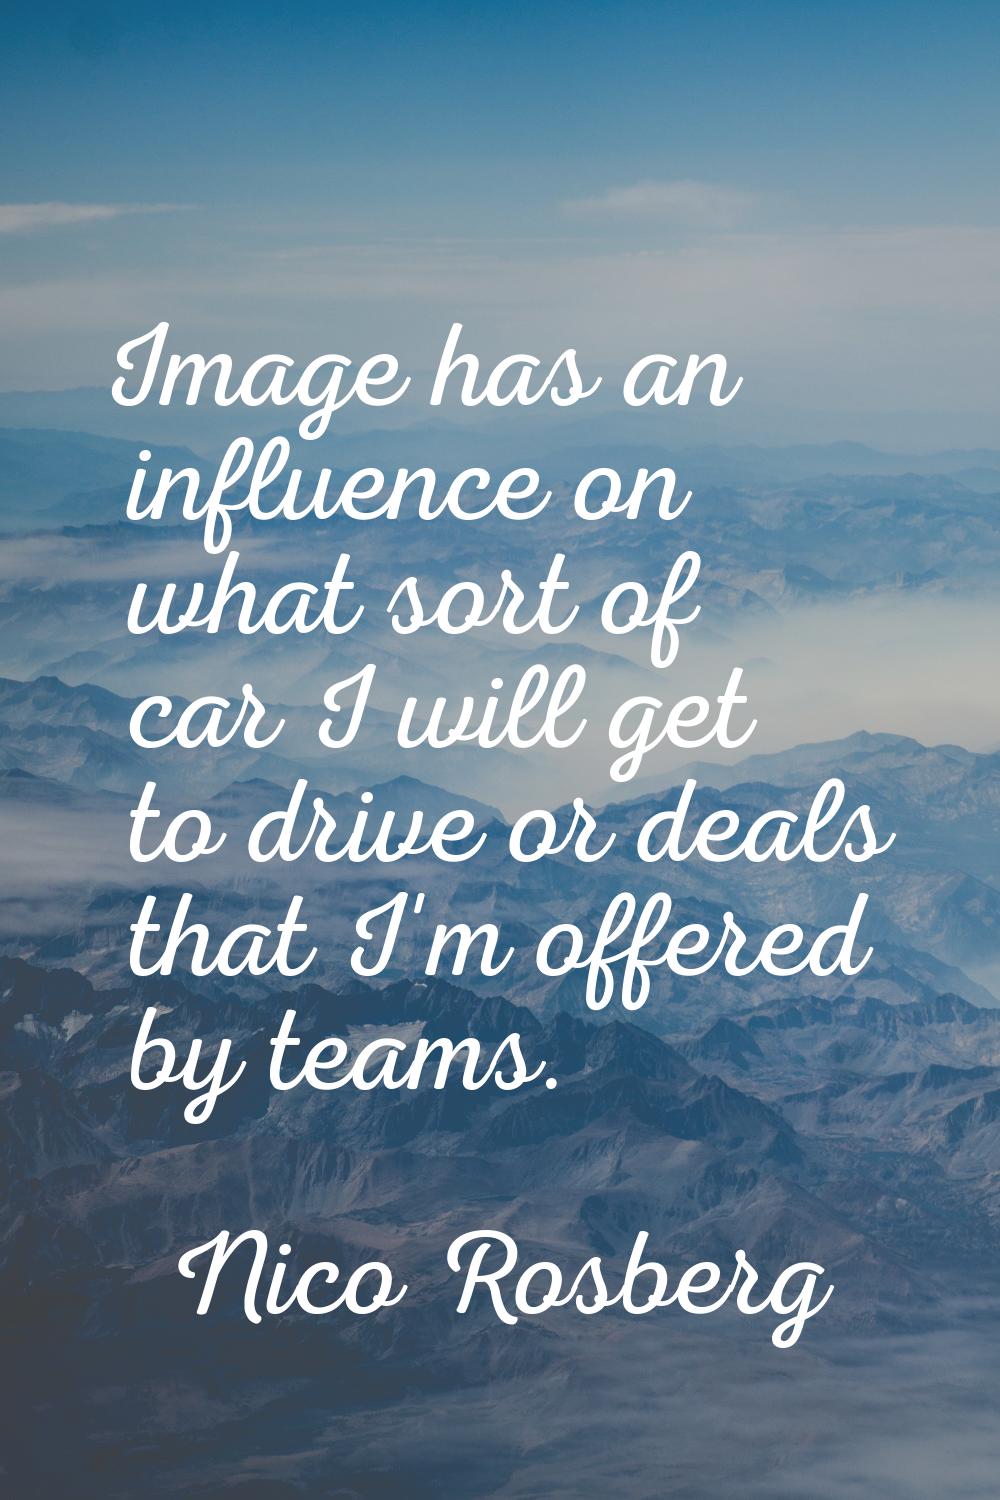 Image has an influence on what sort of car I will get to drive or deals that I'm offered by teams.